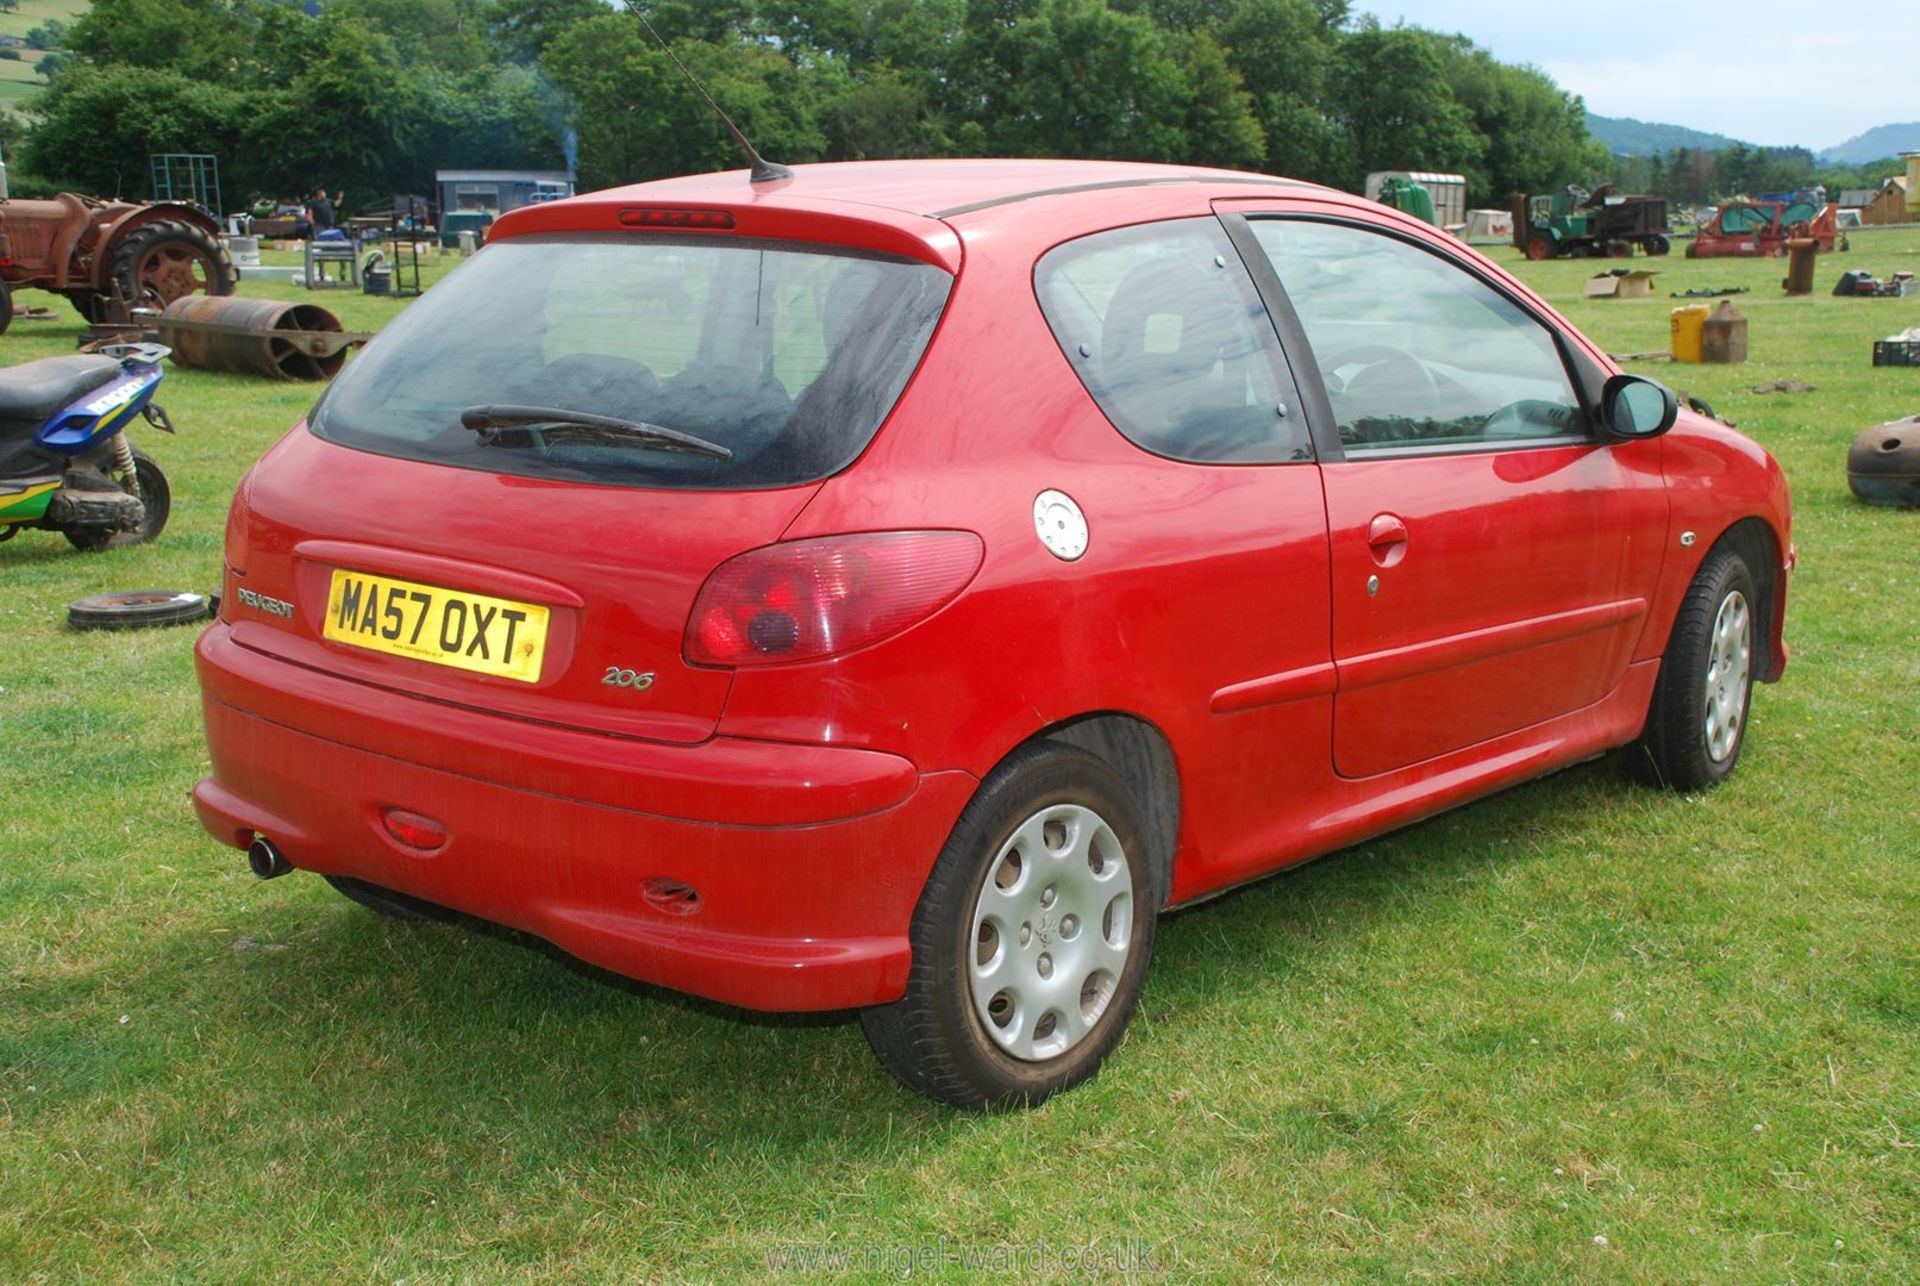 A petrol engined Peugeot 206 hatchback 1.4 Look 3 door in red - Image 3 of 4